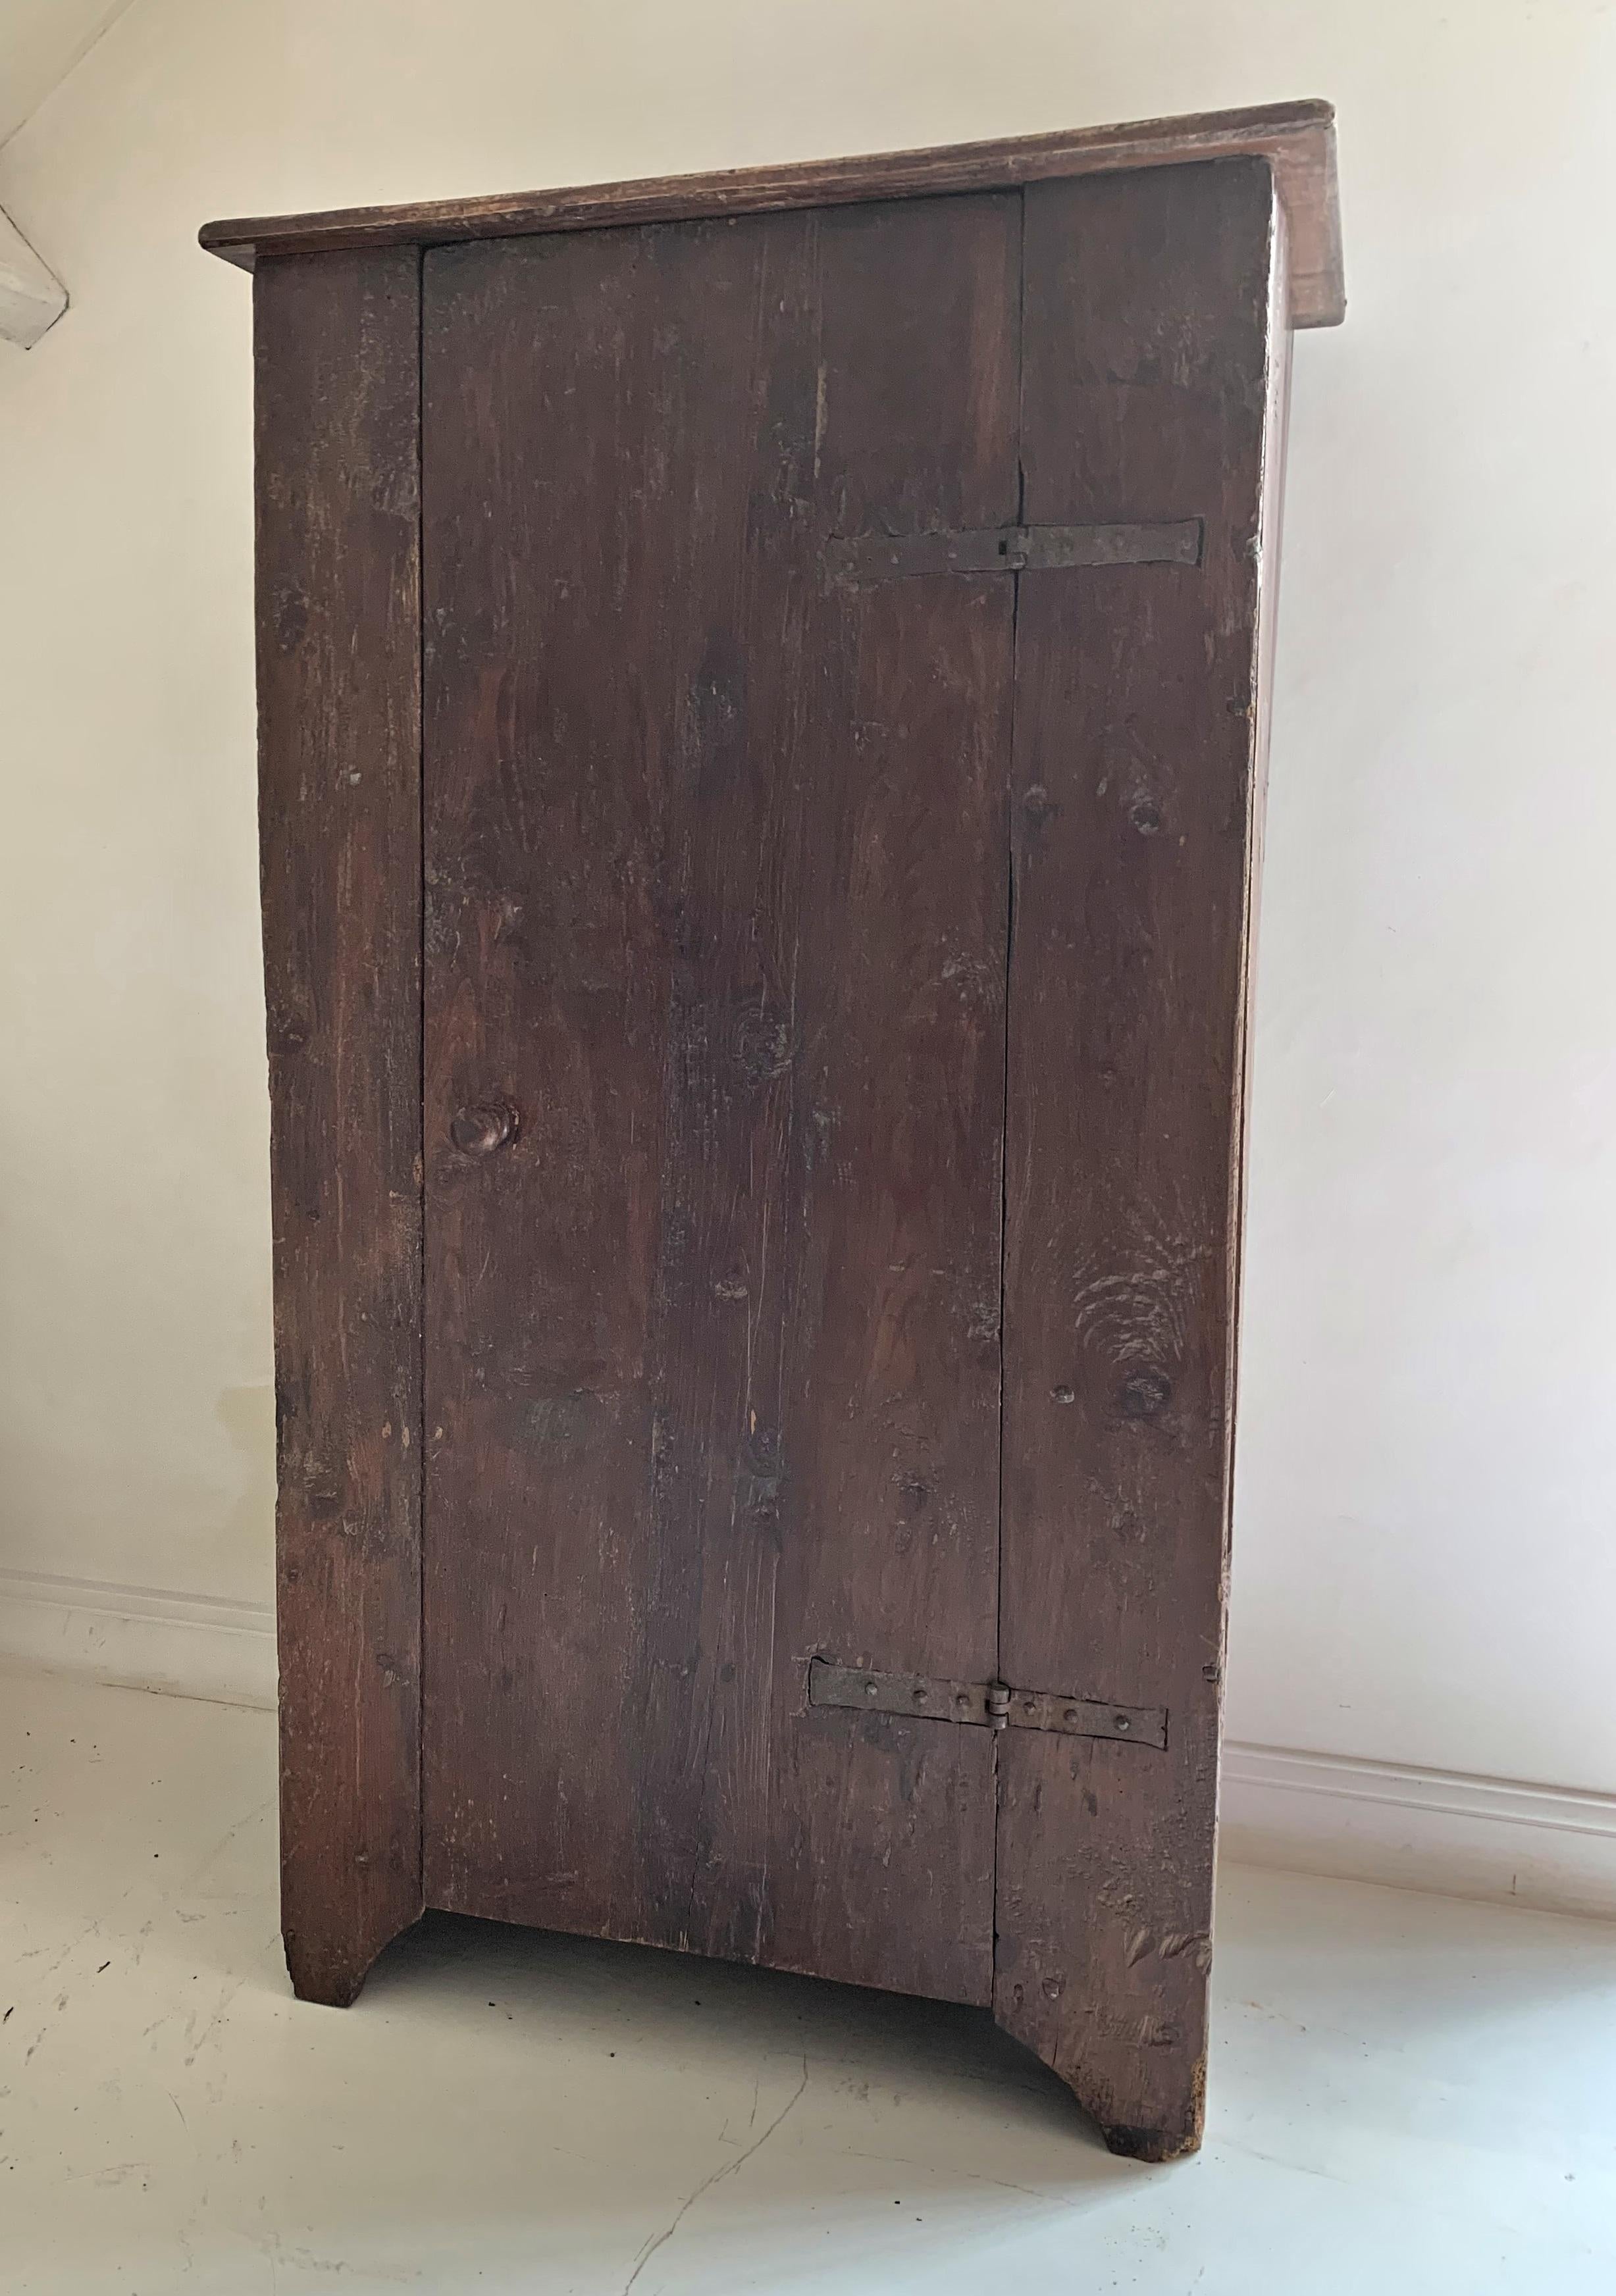 A good 19th century Pyrinee cupboard. Beautiful in its simplicity. Sturdy and ready to use.